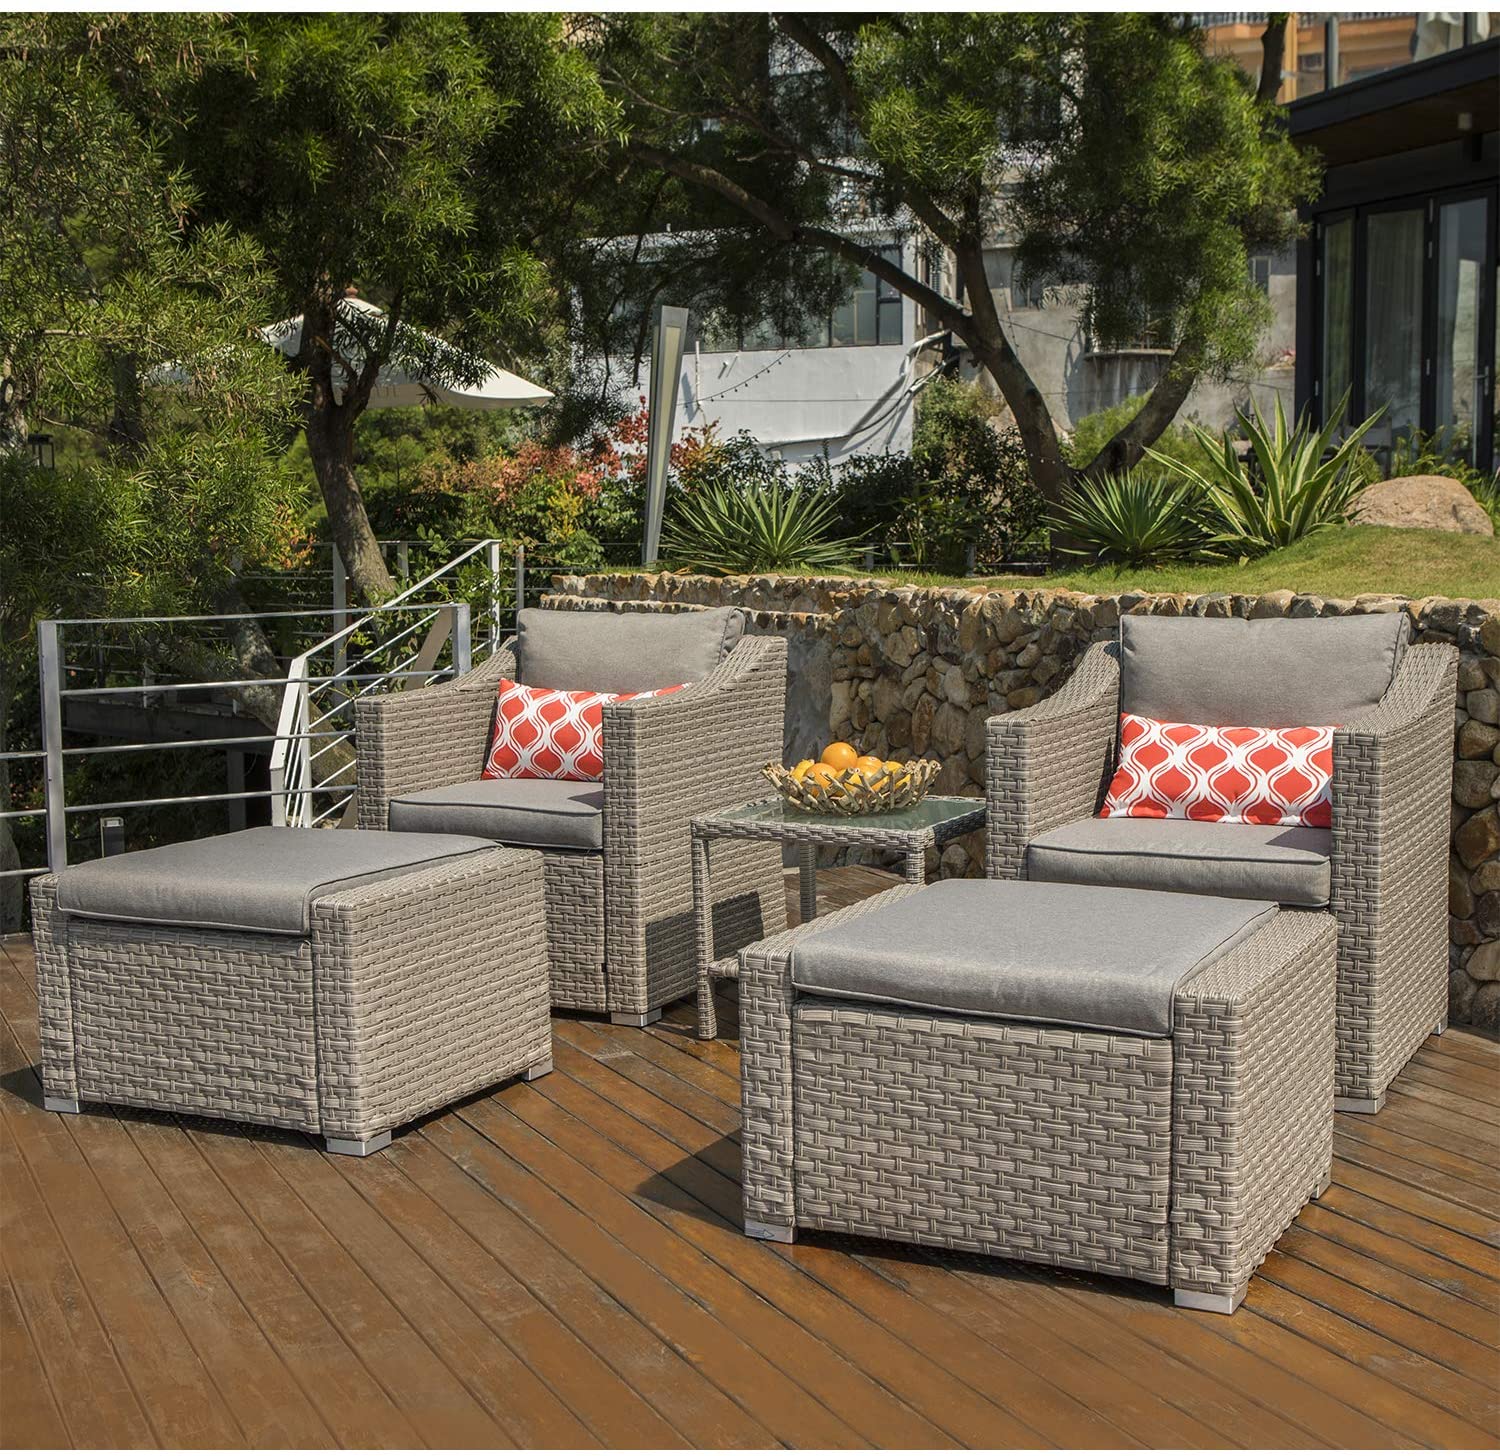 COSIEST 5-Piece Outdoor Furniture Lounge Set Warm Gray Wicker Sectional Sofa with Thick Cushions, Glass-Top Table, 2 Ottomans, 2 Coral Pattern Pillows - image 3 of 6